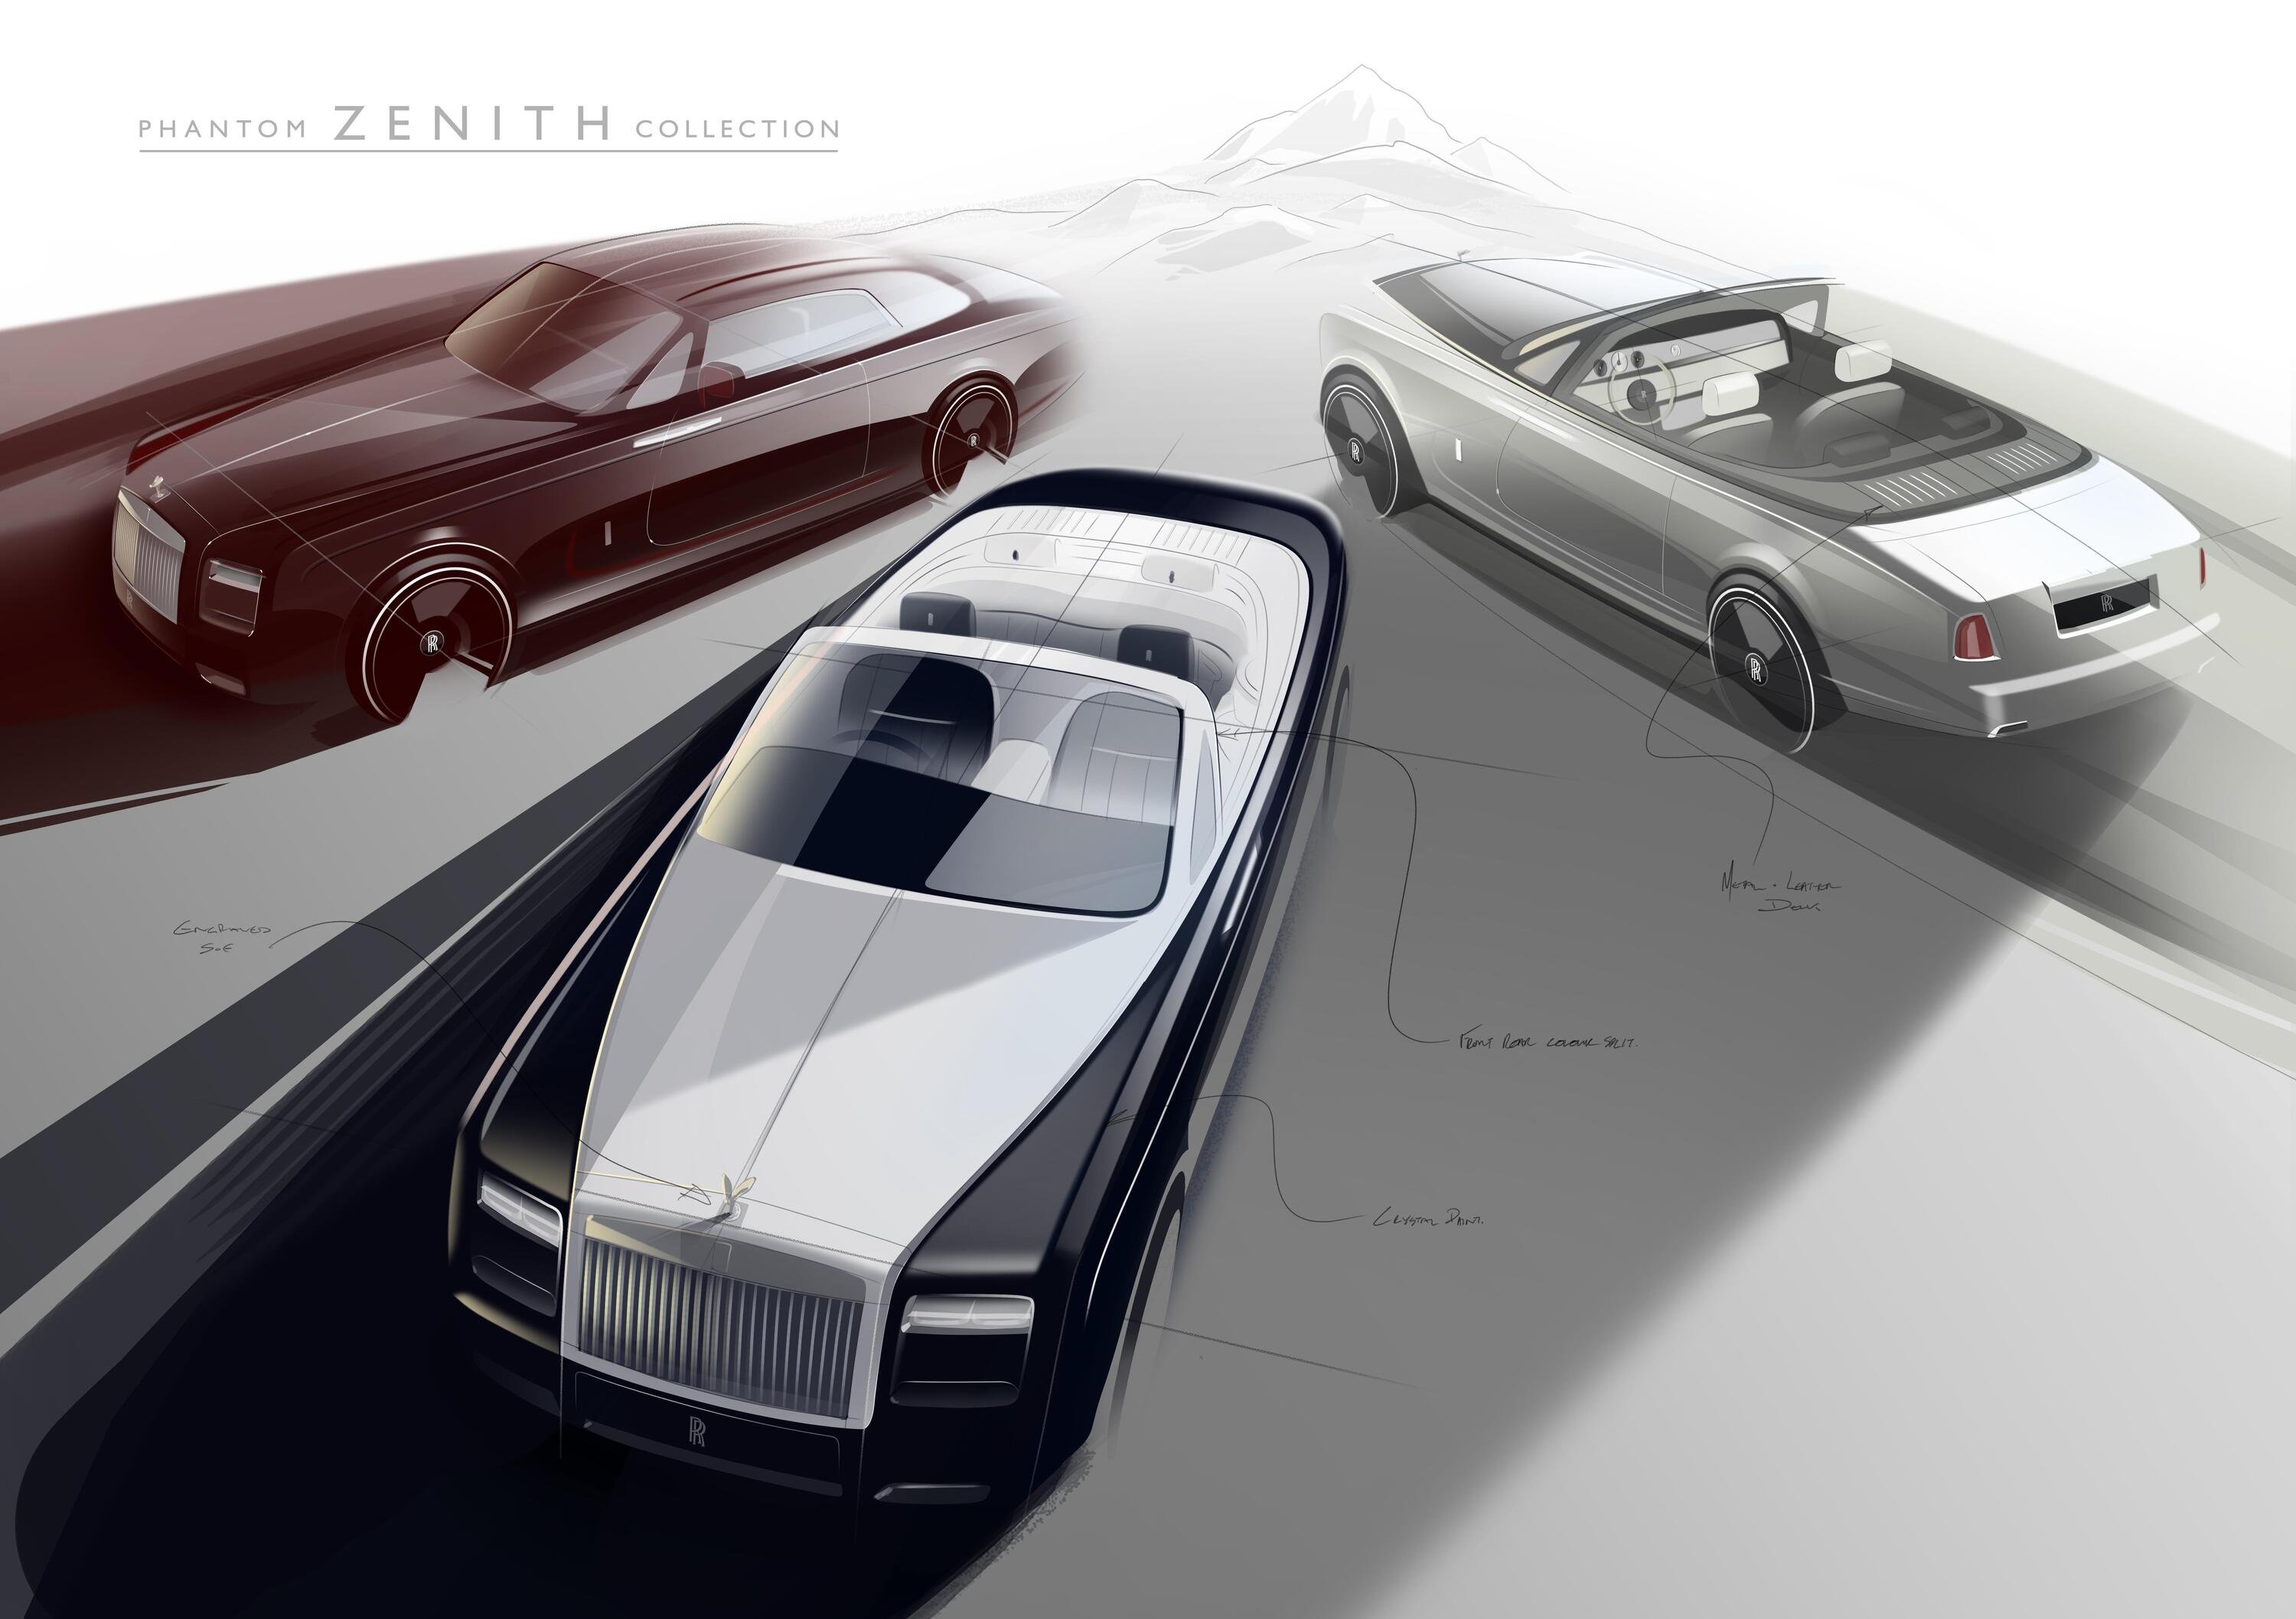 Phantom Zenith Collection: andare in &quot;pensione&quot; in stile Rolls Royce